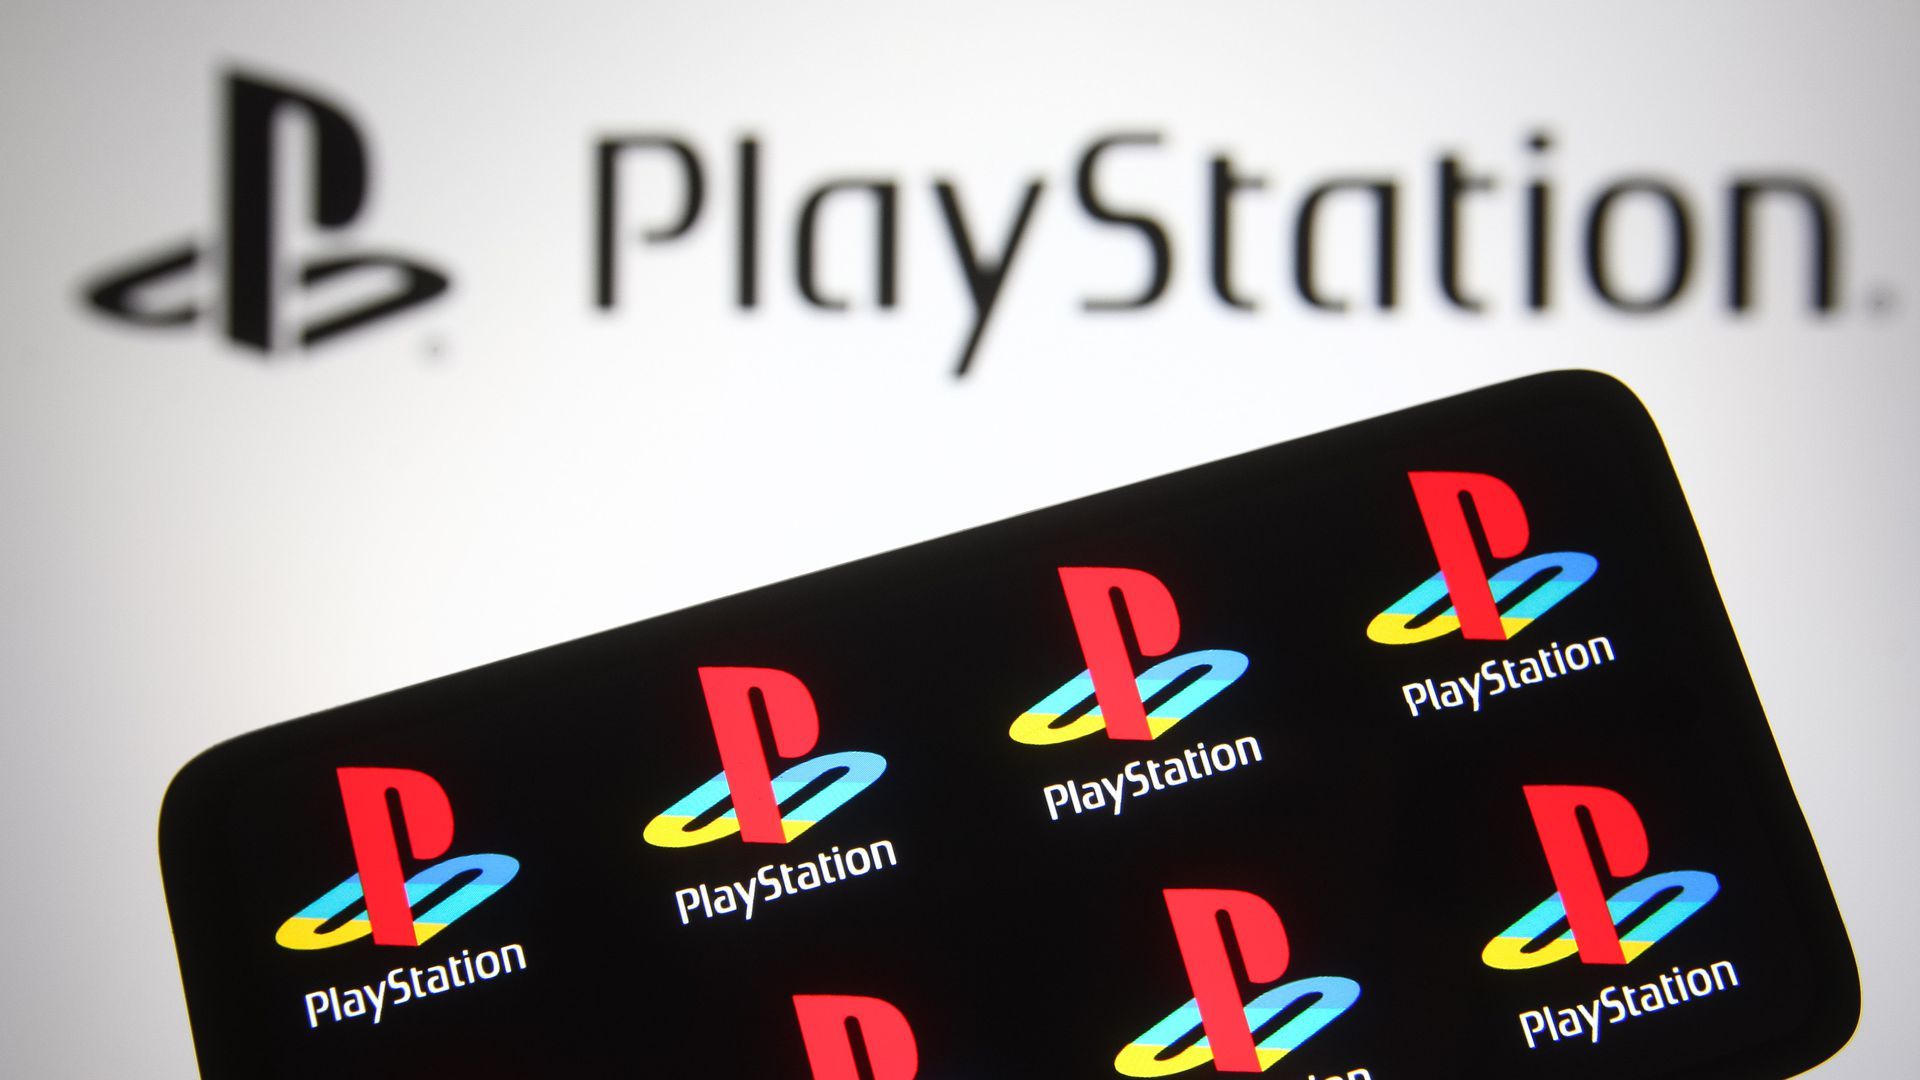 Colorful PlayStation logos on a black card in front of a PlayStation logo background.